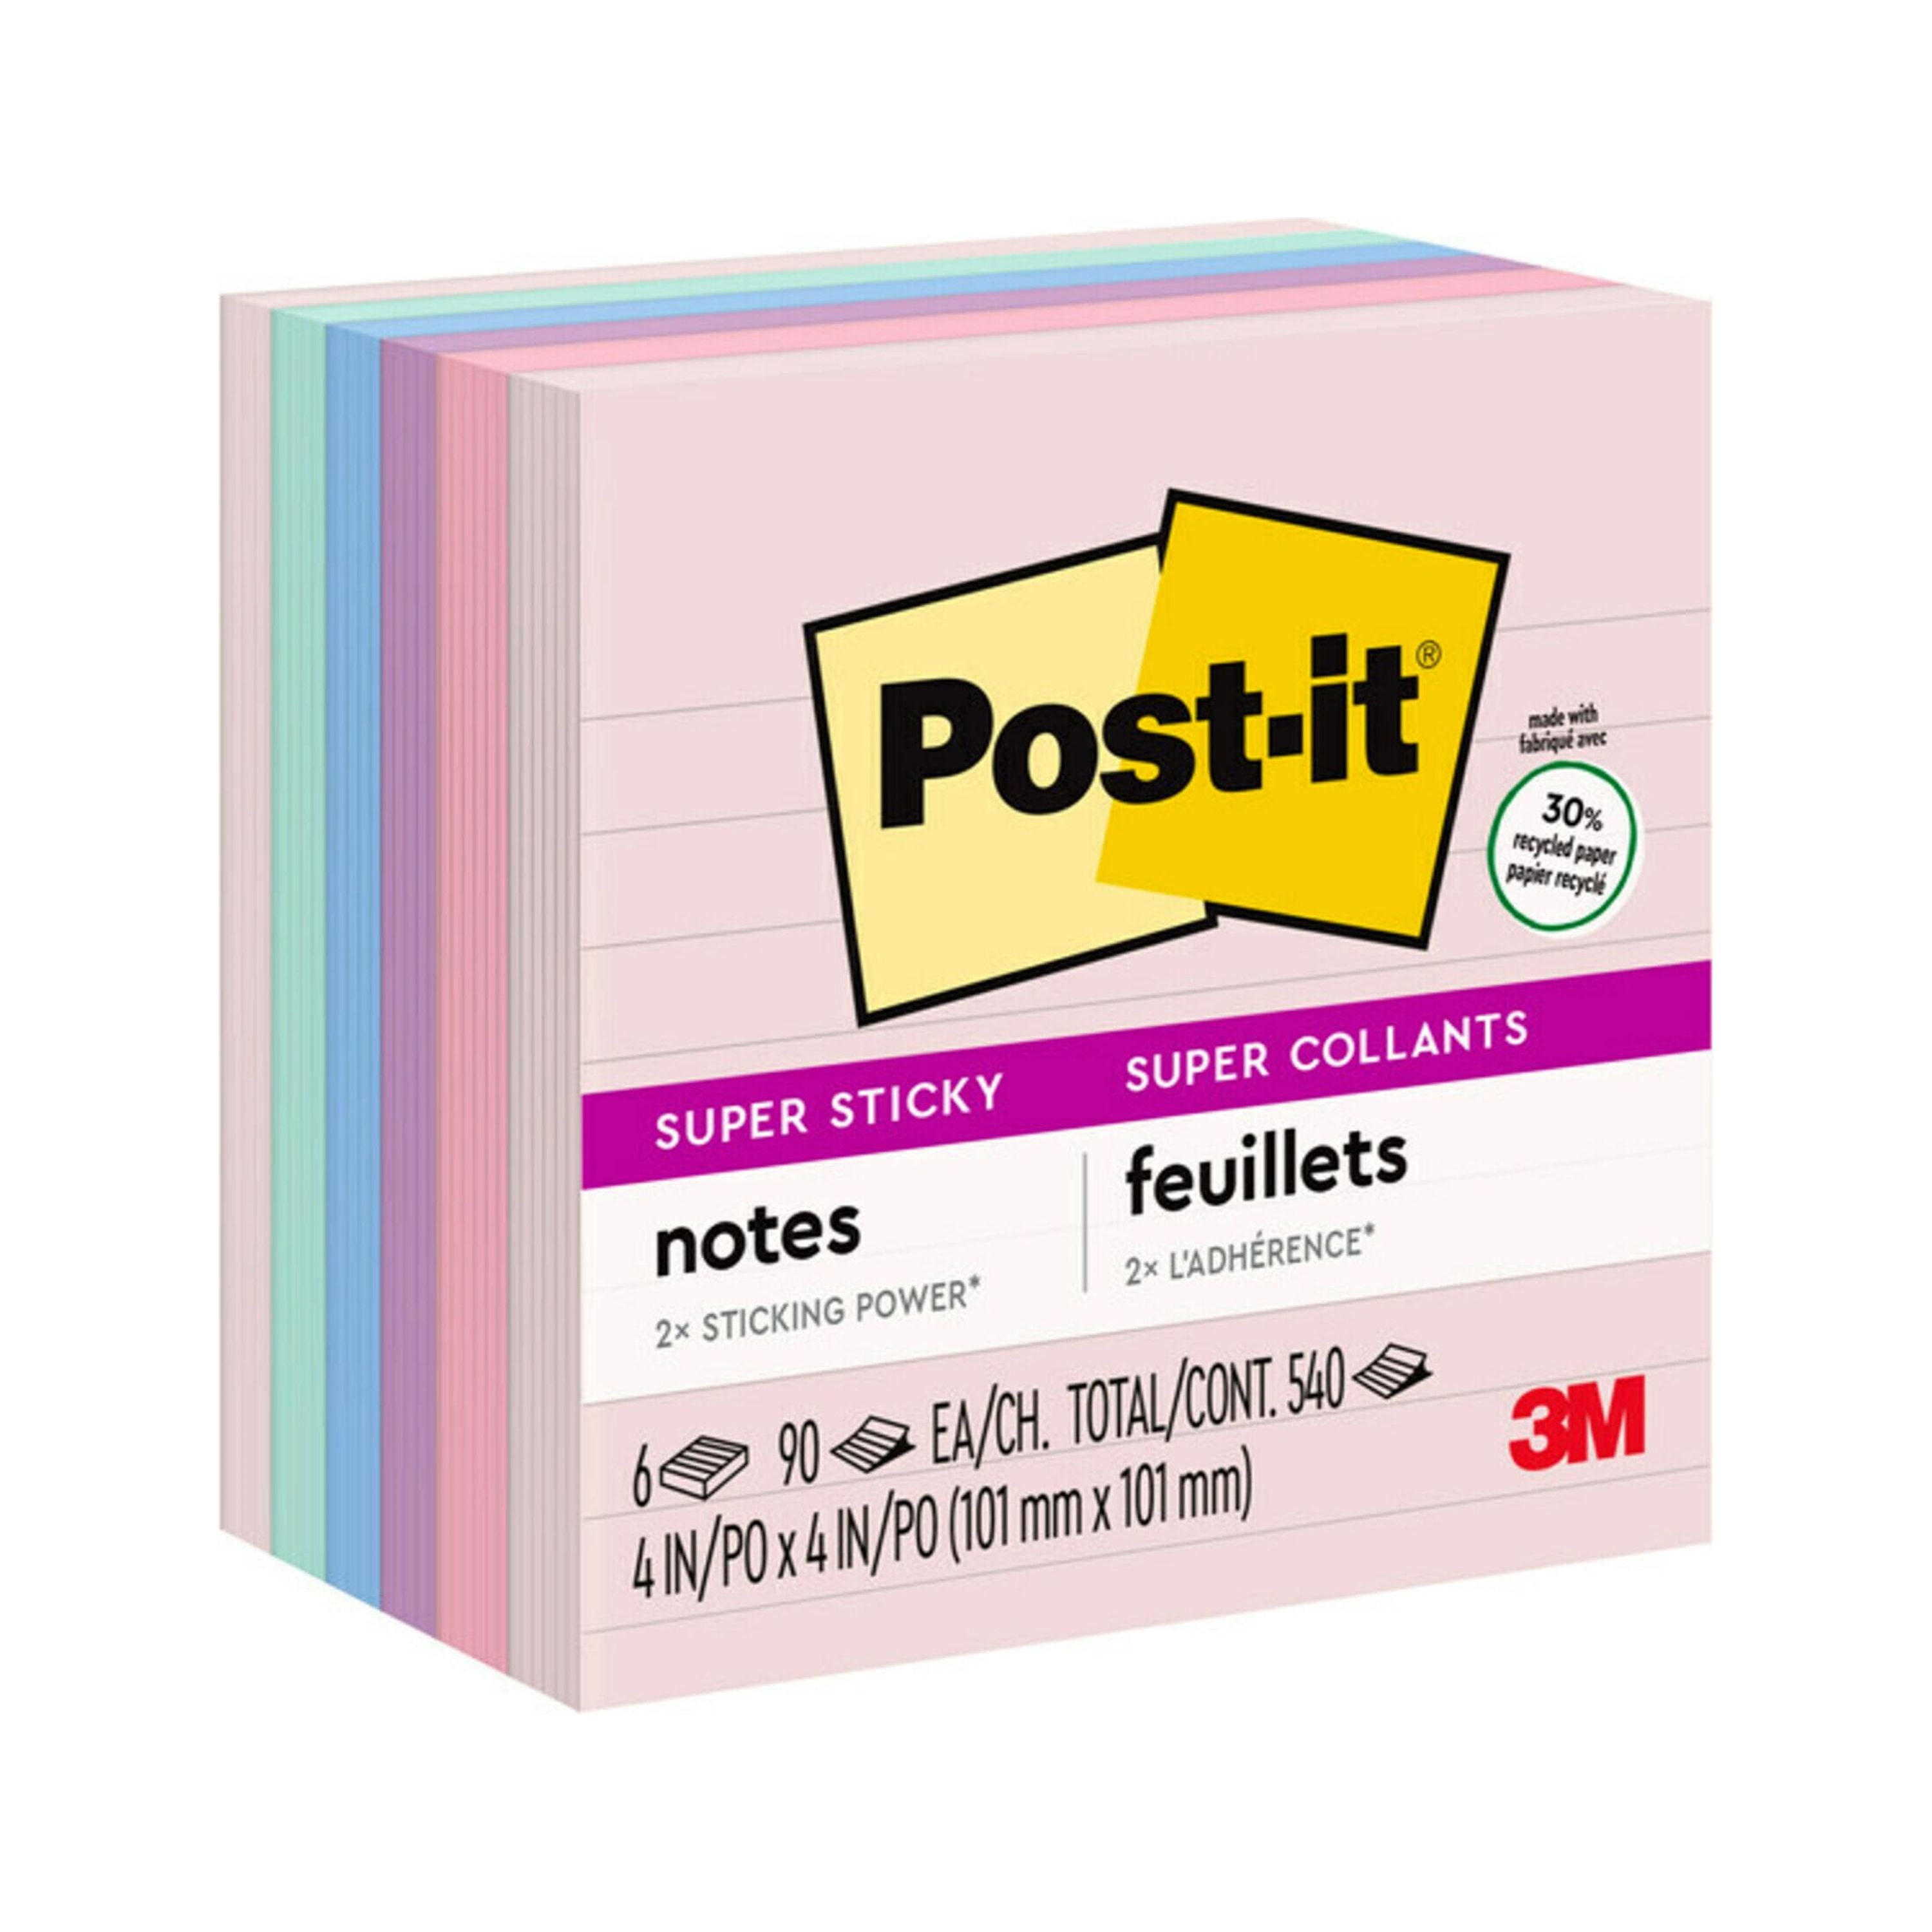 Pads /pad Large Sticky Notes 4x6 Lined Sticky Notes Colorful